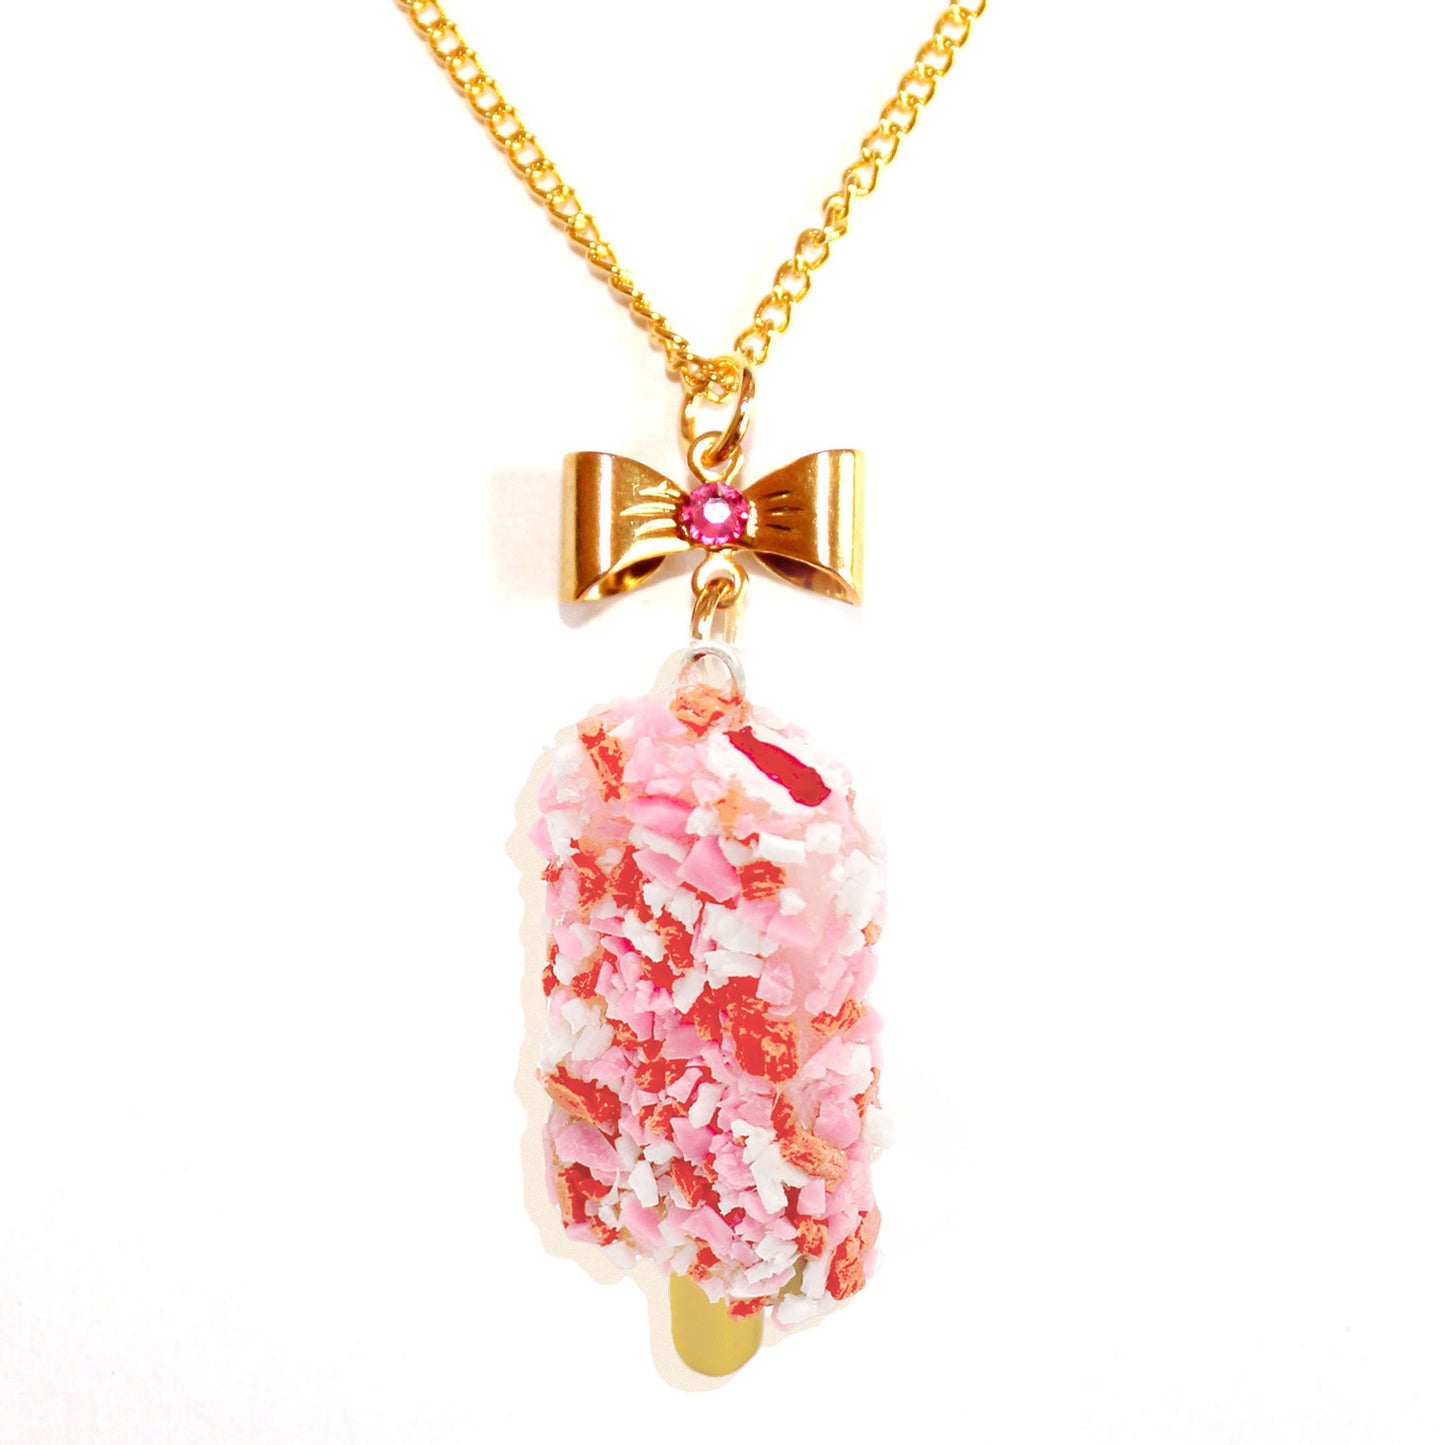 Strawberry Shortcake Ice Cream Bar Necklace - Stainless Steel or Gold